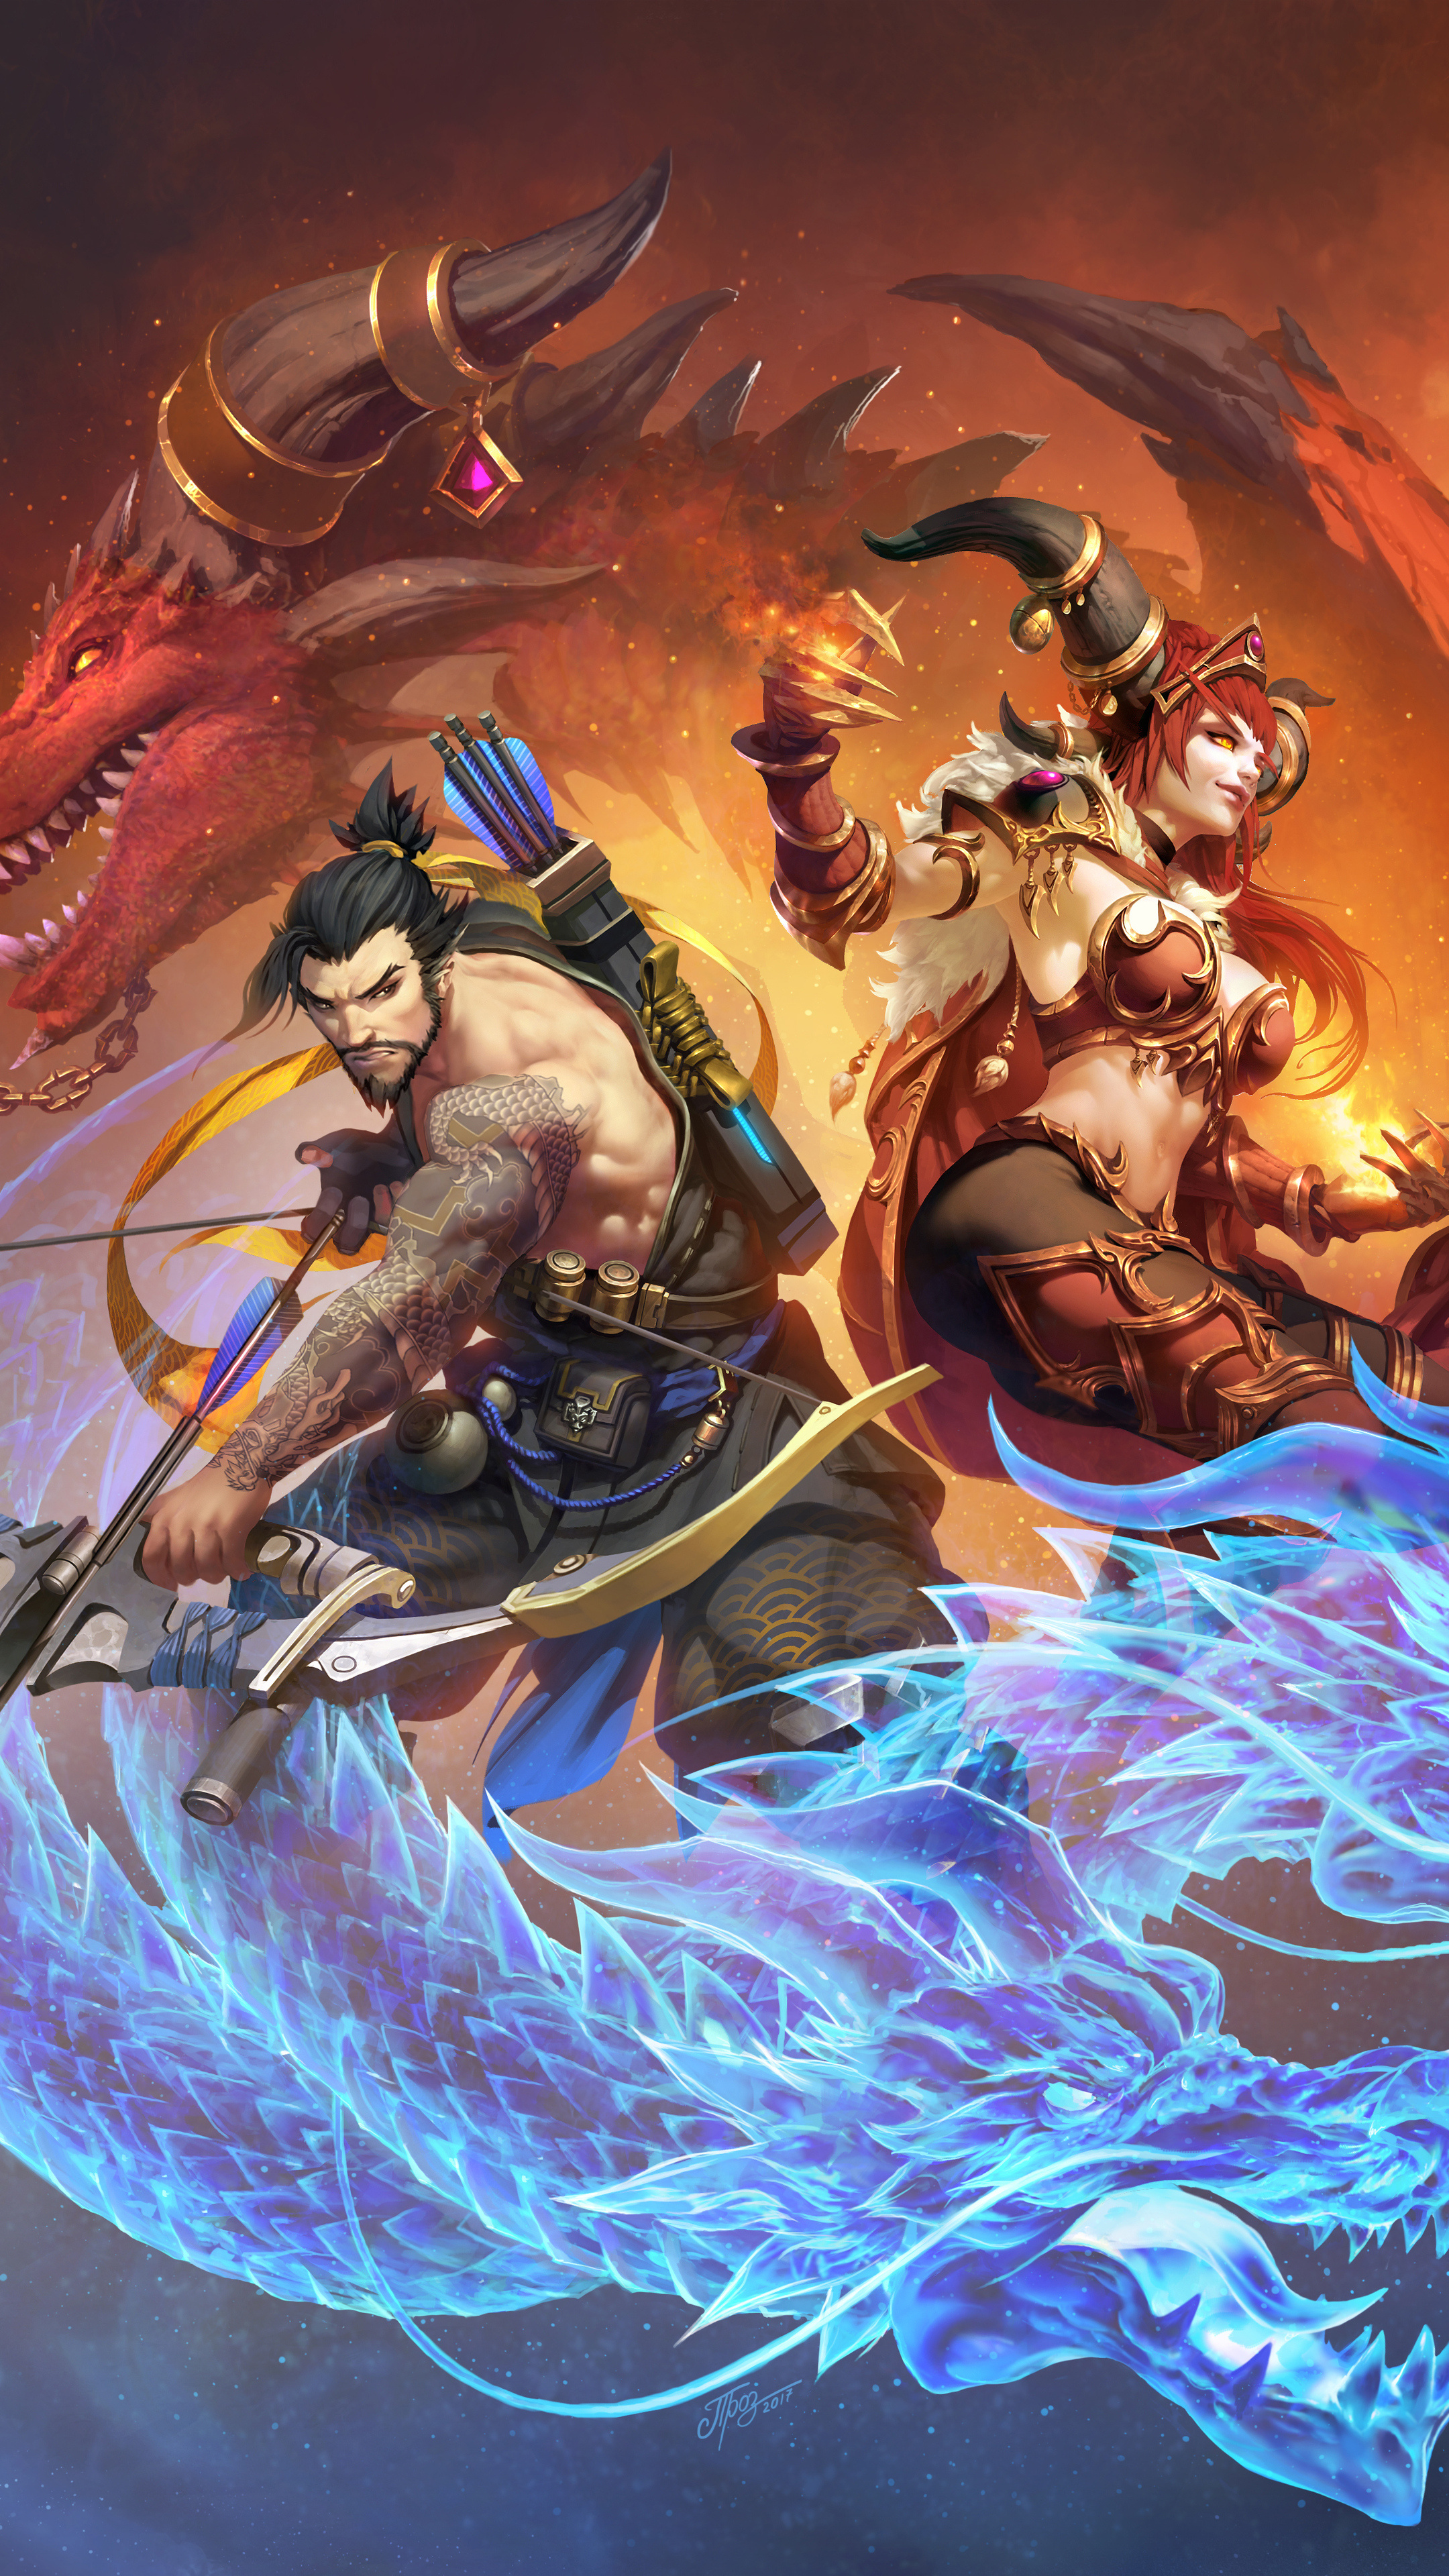 Dragons of Hanzo, 4k gaming wallpapers, Sony Xperia premium, High-definition images, 2160x3840 4K Phone